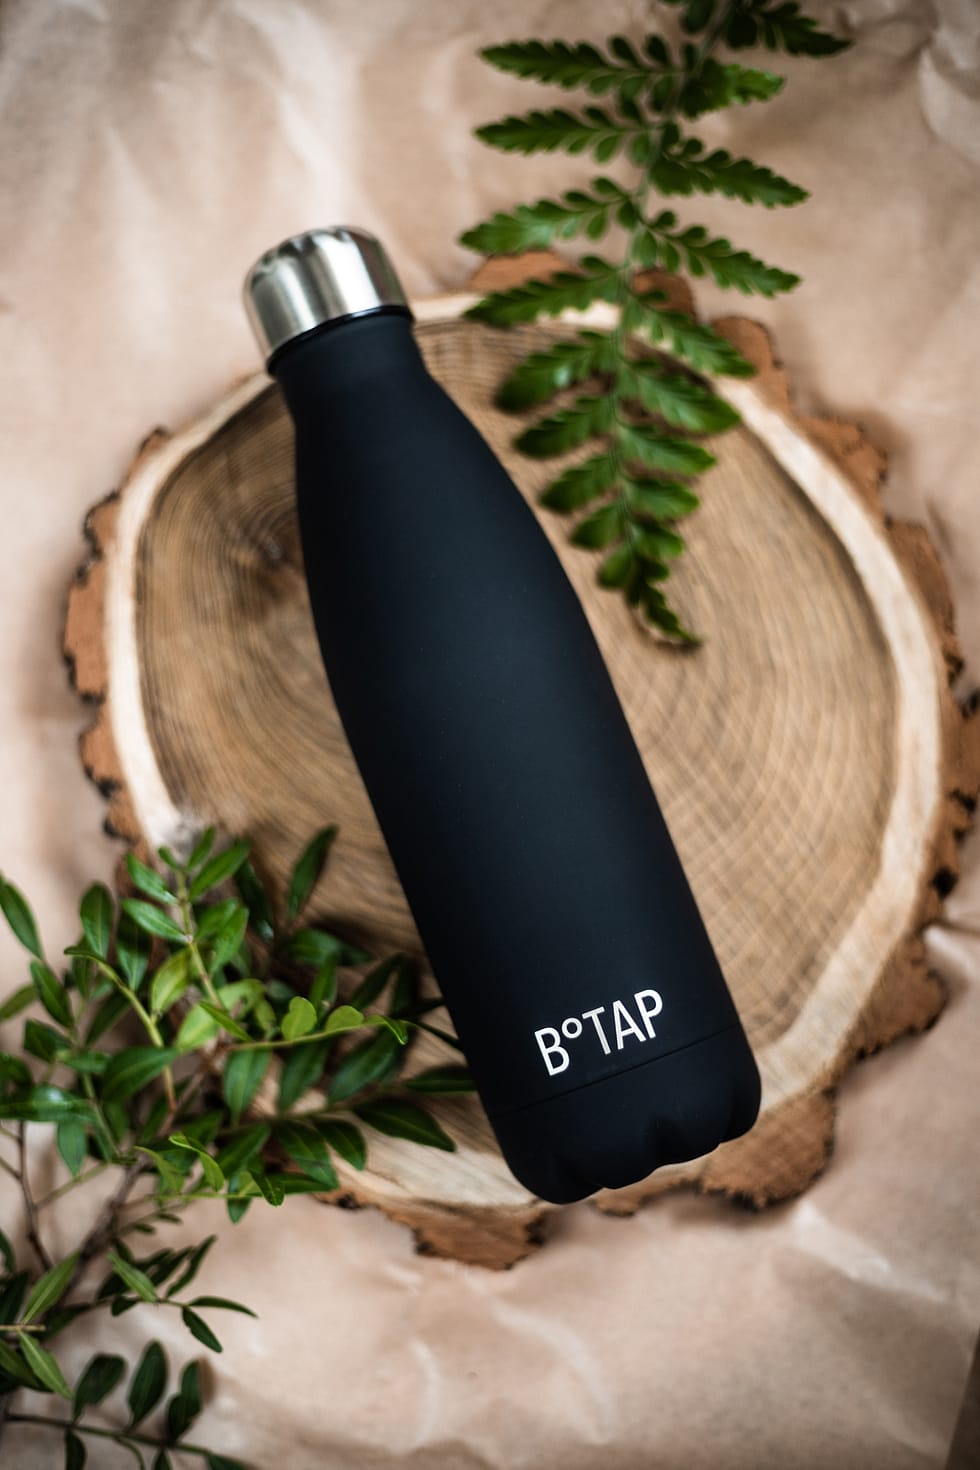 Botap thermos bottle on a wooden slice.